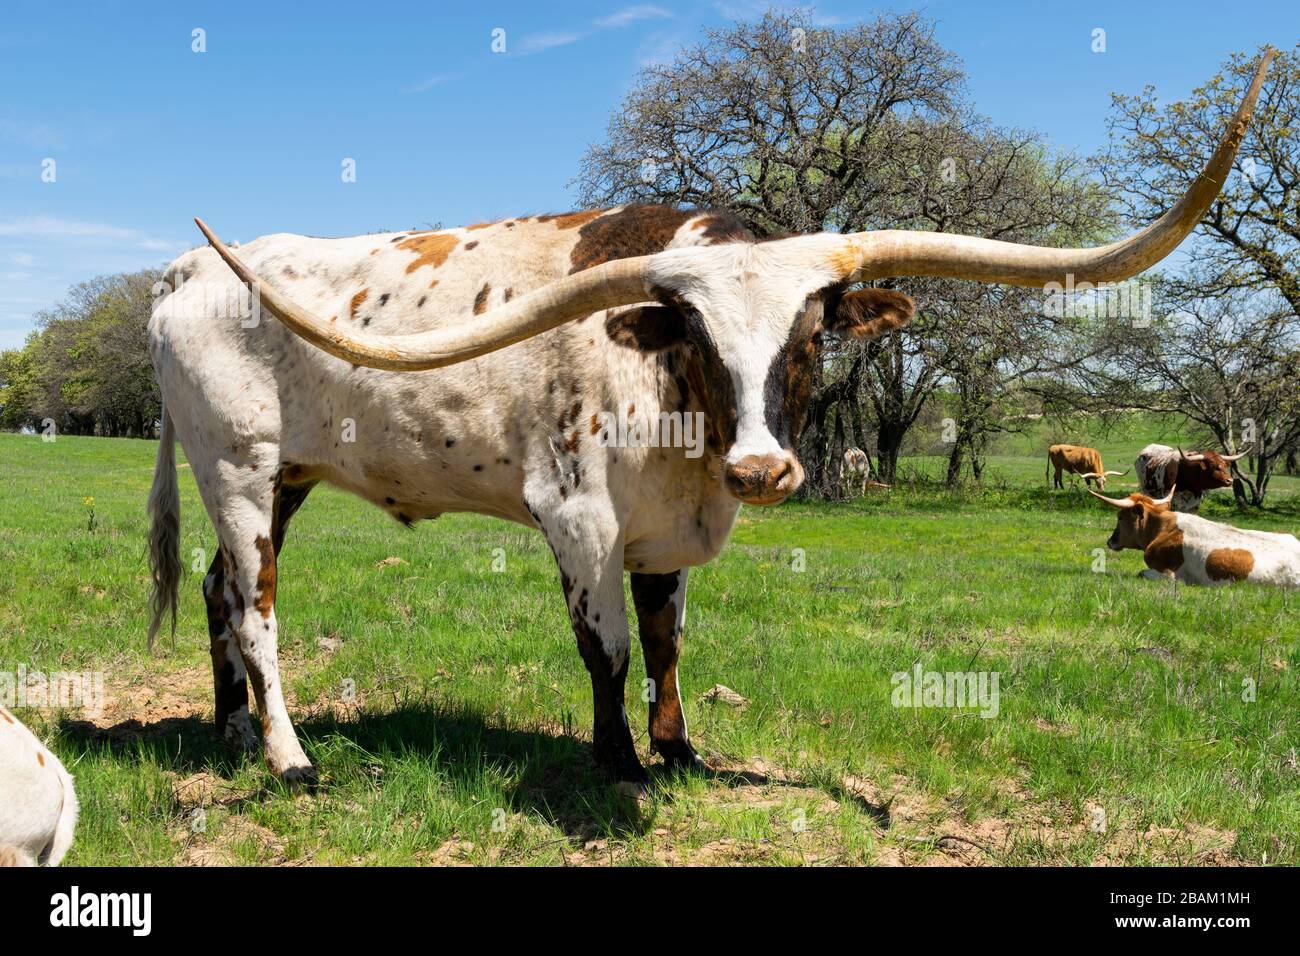 A large, intimidating white Longhorn bull with brown spots and very long, curved horns standing in a ranch pasture with other cattle and trees in the Stock Photo